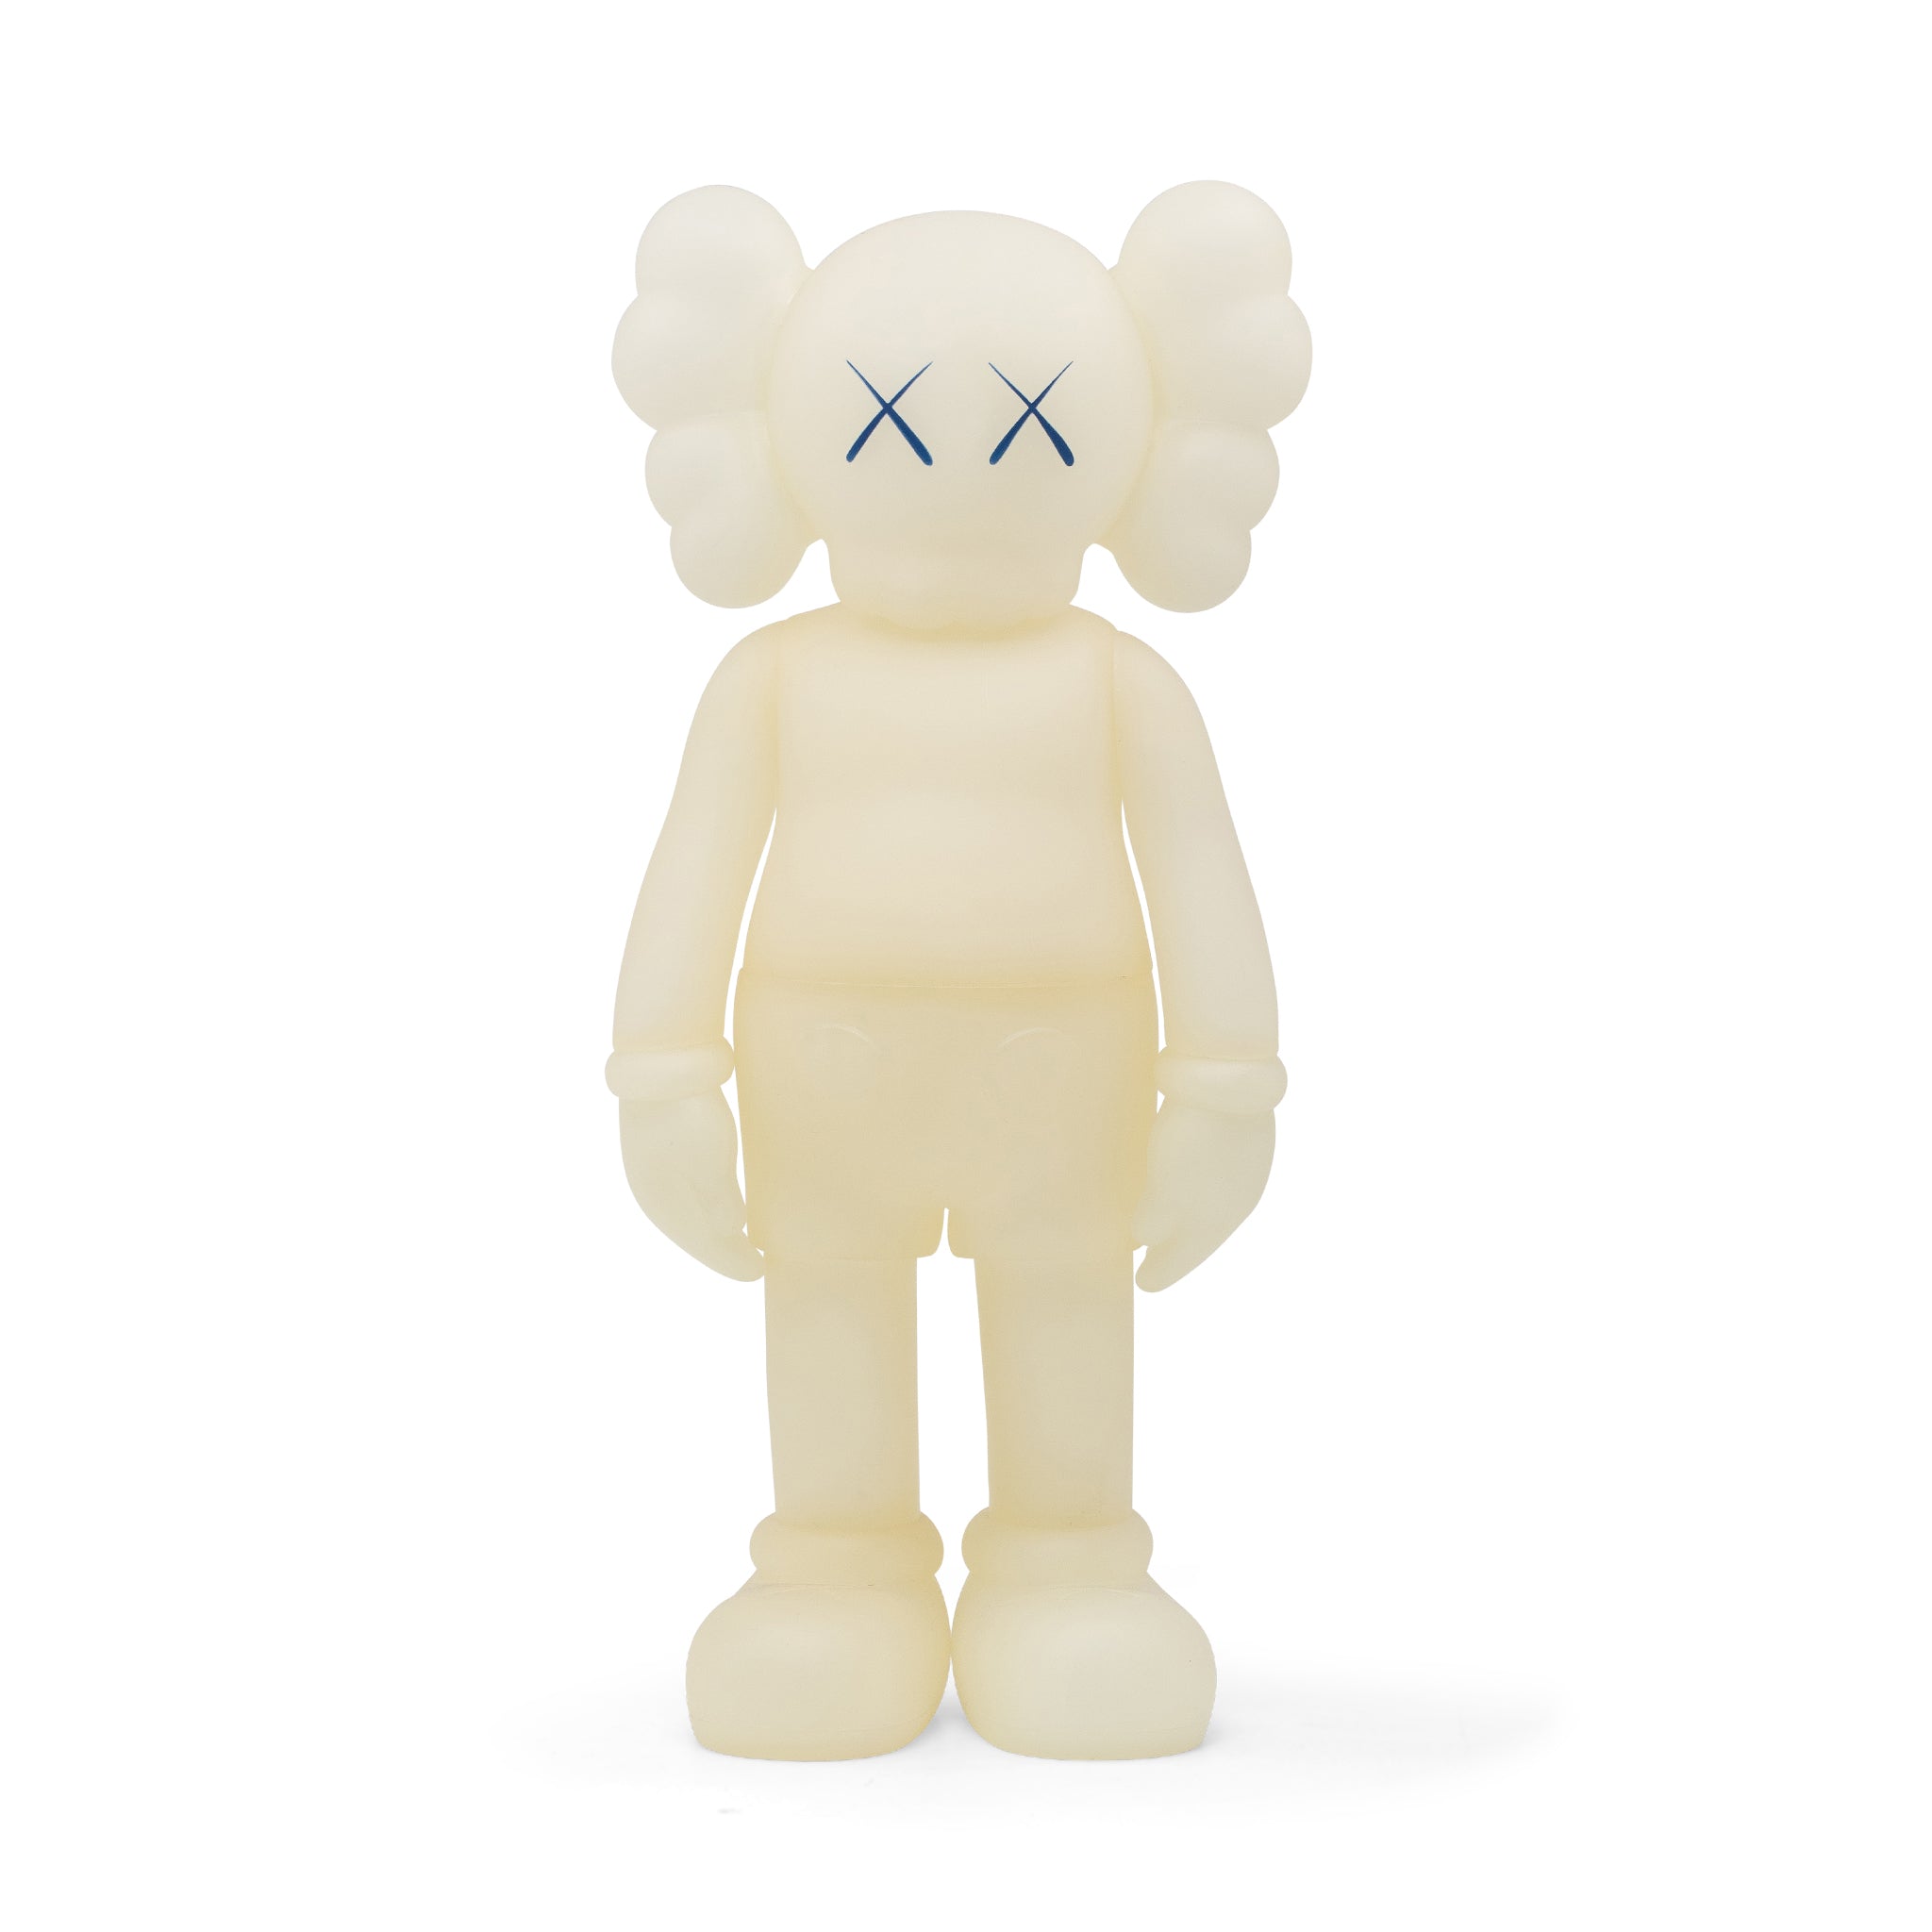 KAWS FIVE YEARS LATER COMPANION GLOW IN THE DARK (BLUE EYES)